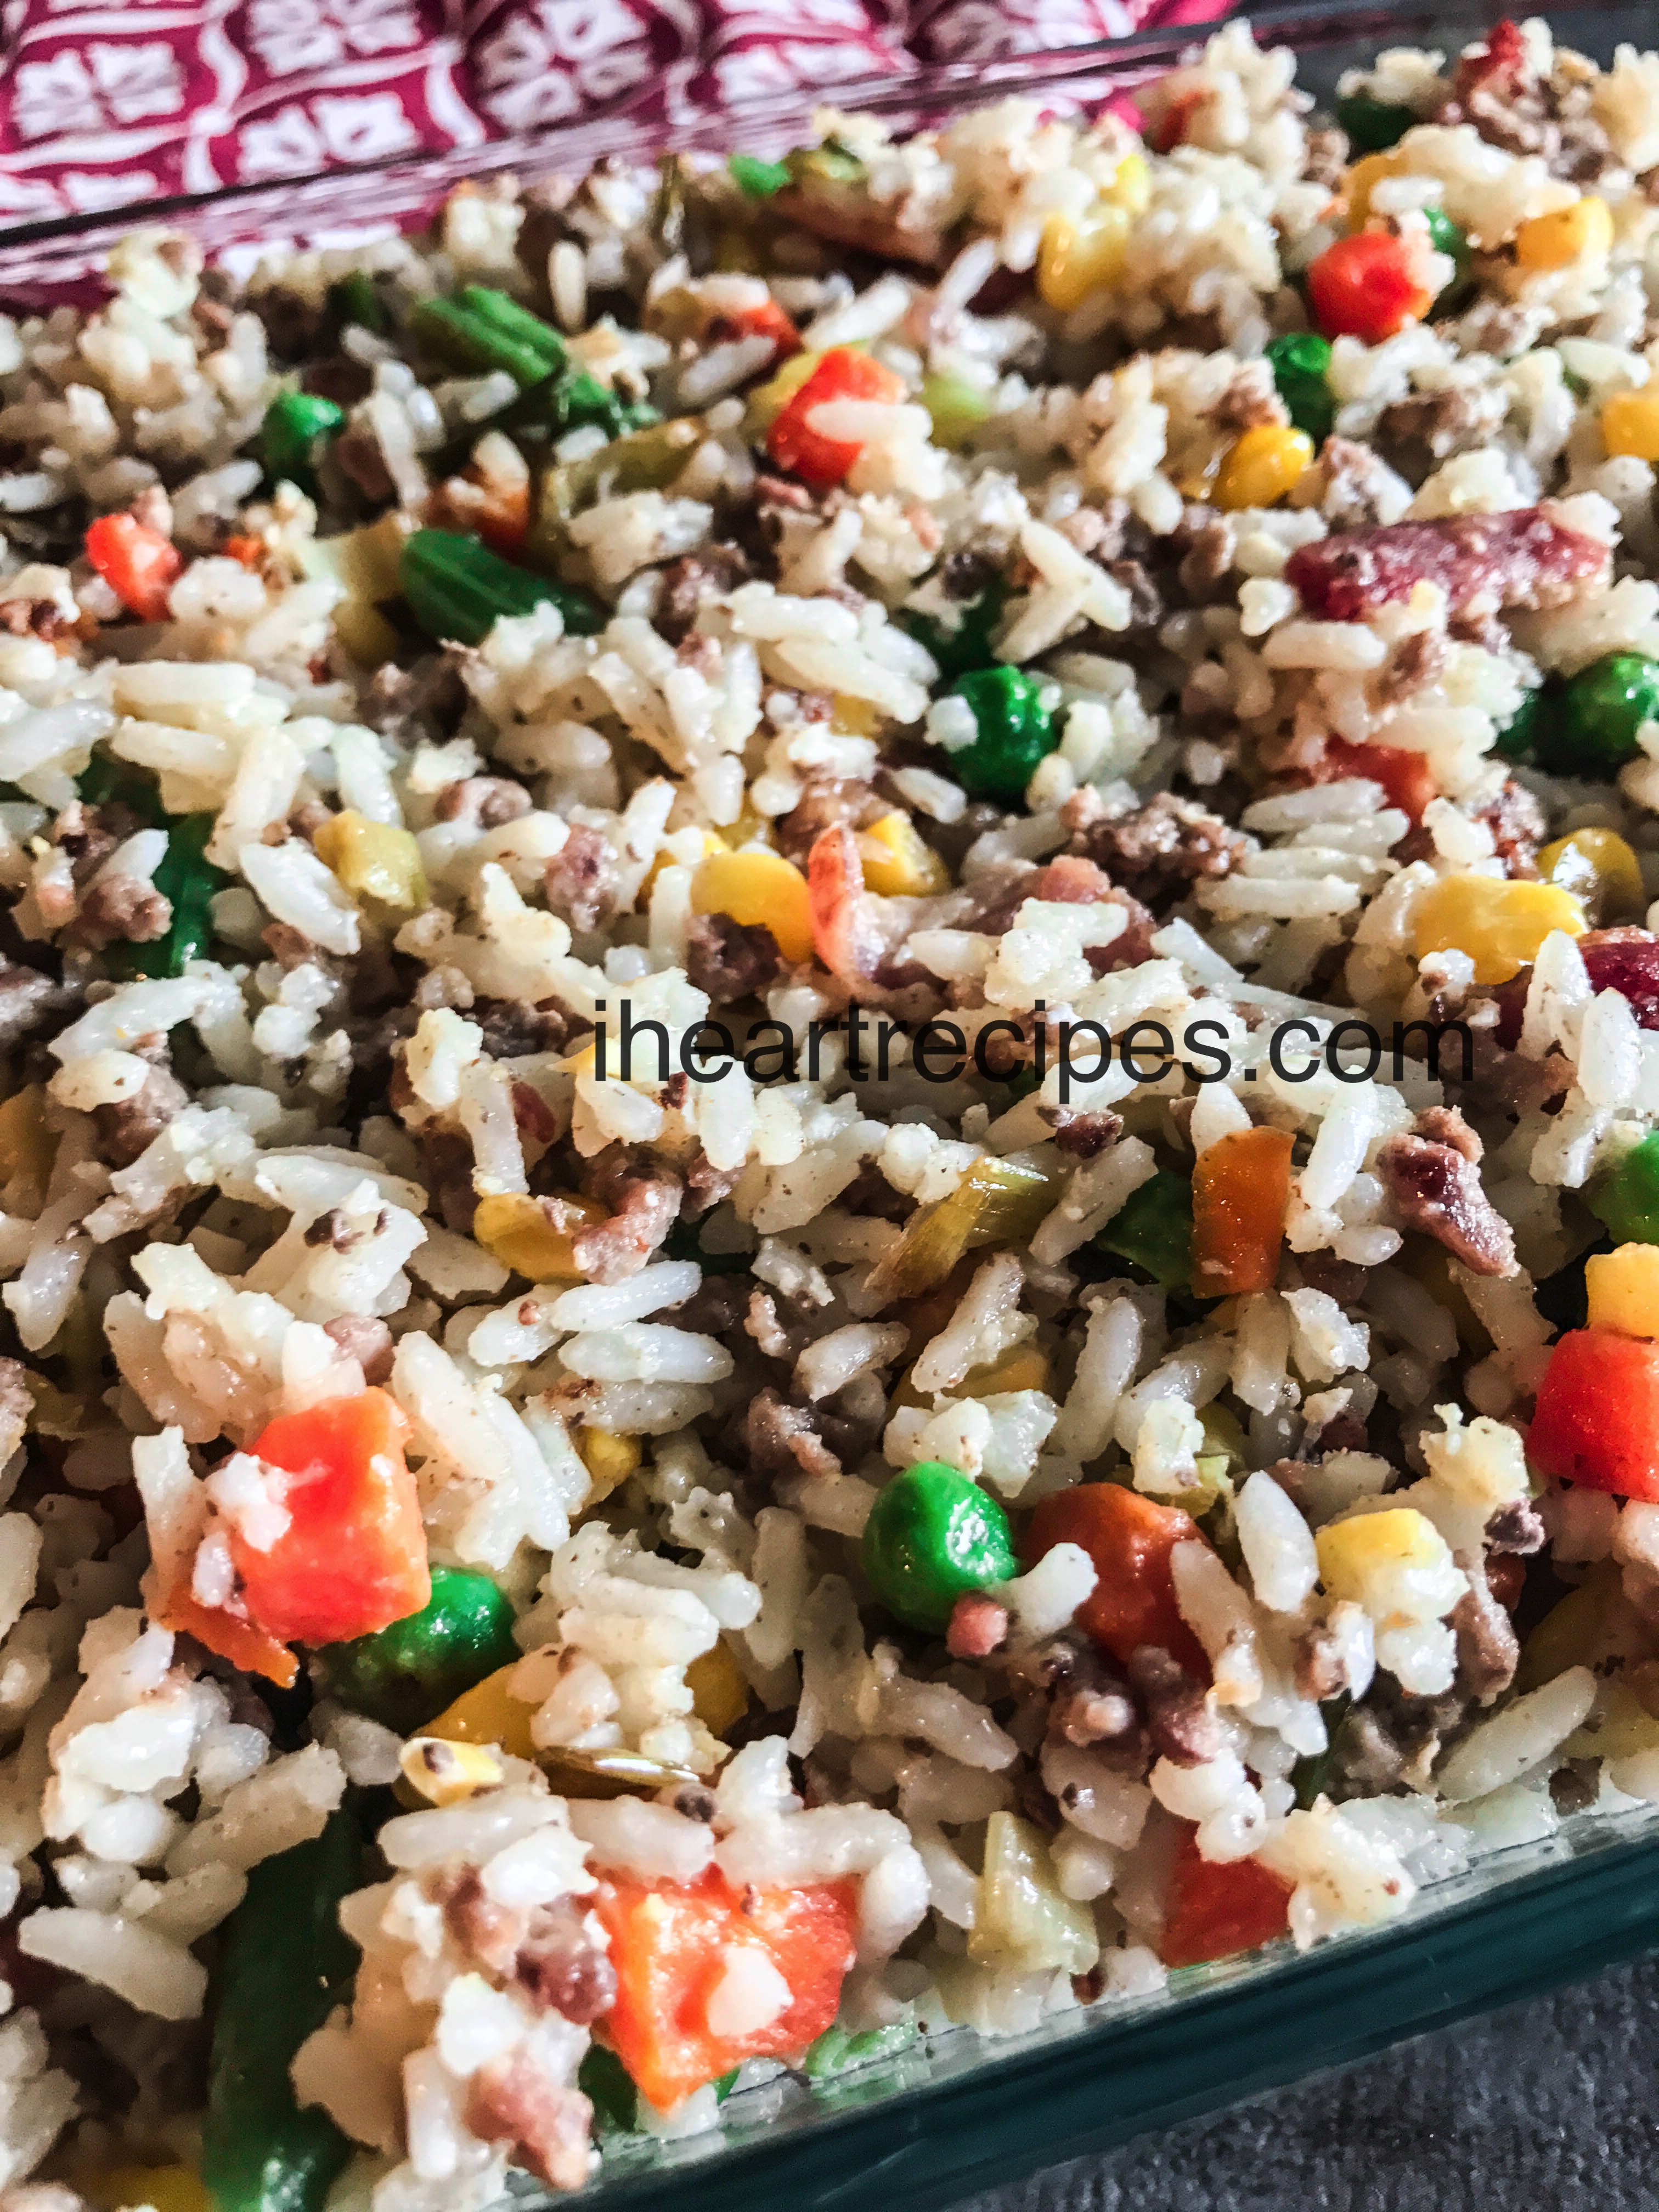 Poor Man's Fried Rice is quick, tasty and budget friendly!